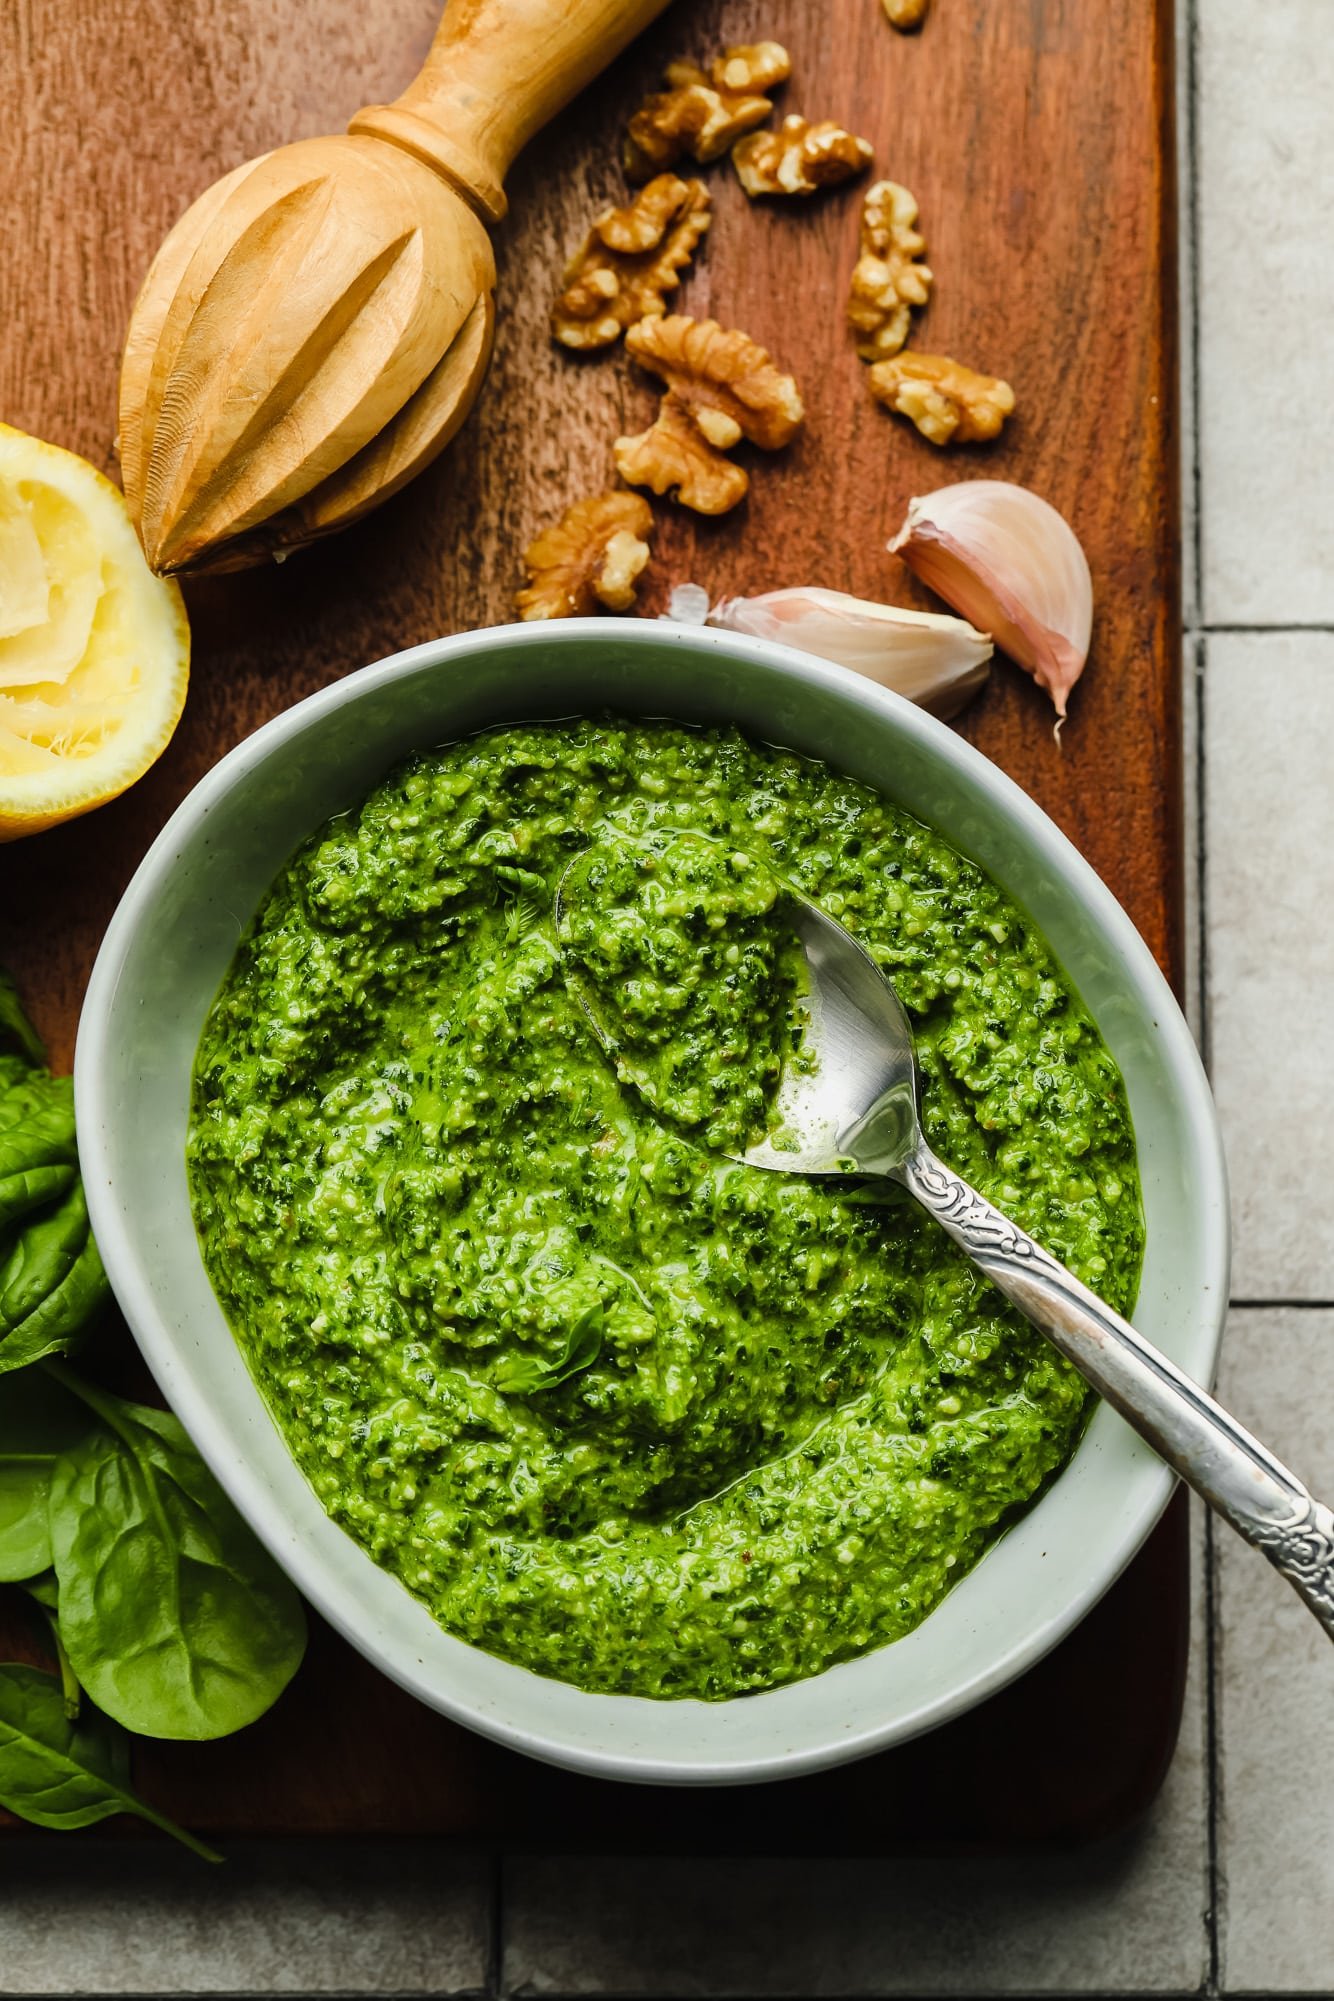 Spoon over the spinach pesto sauce in a gray bowl, surrounded by almonds, garlic, spinach and lemon.